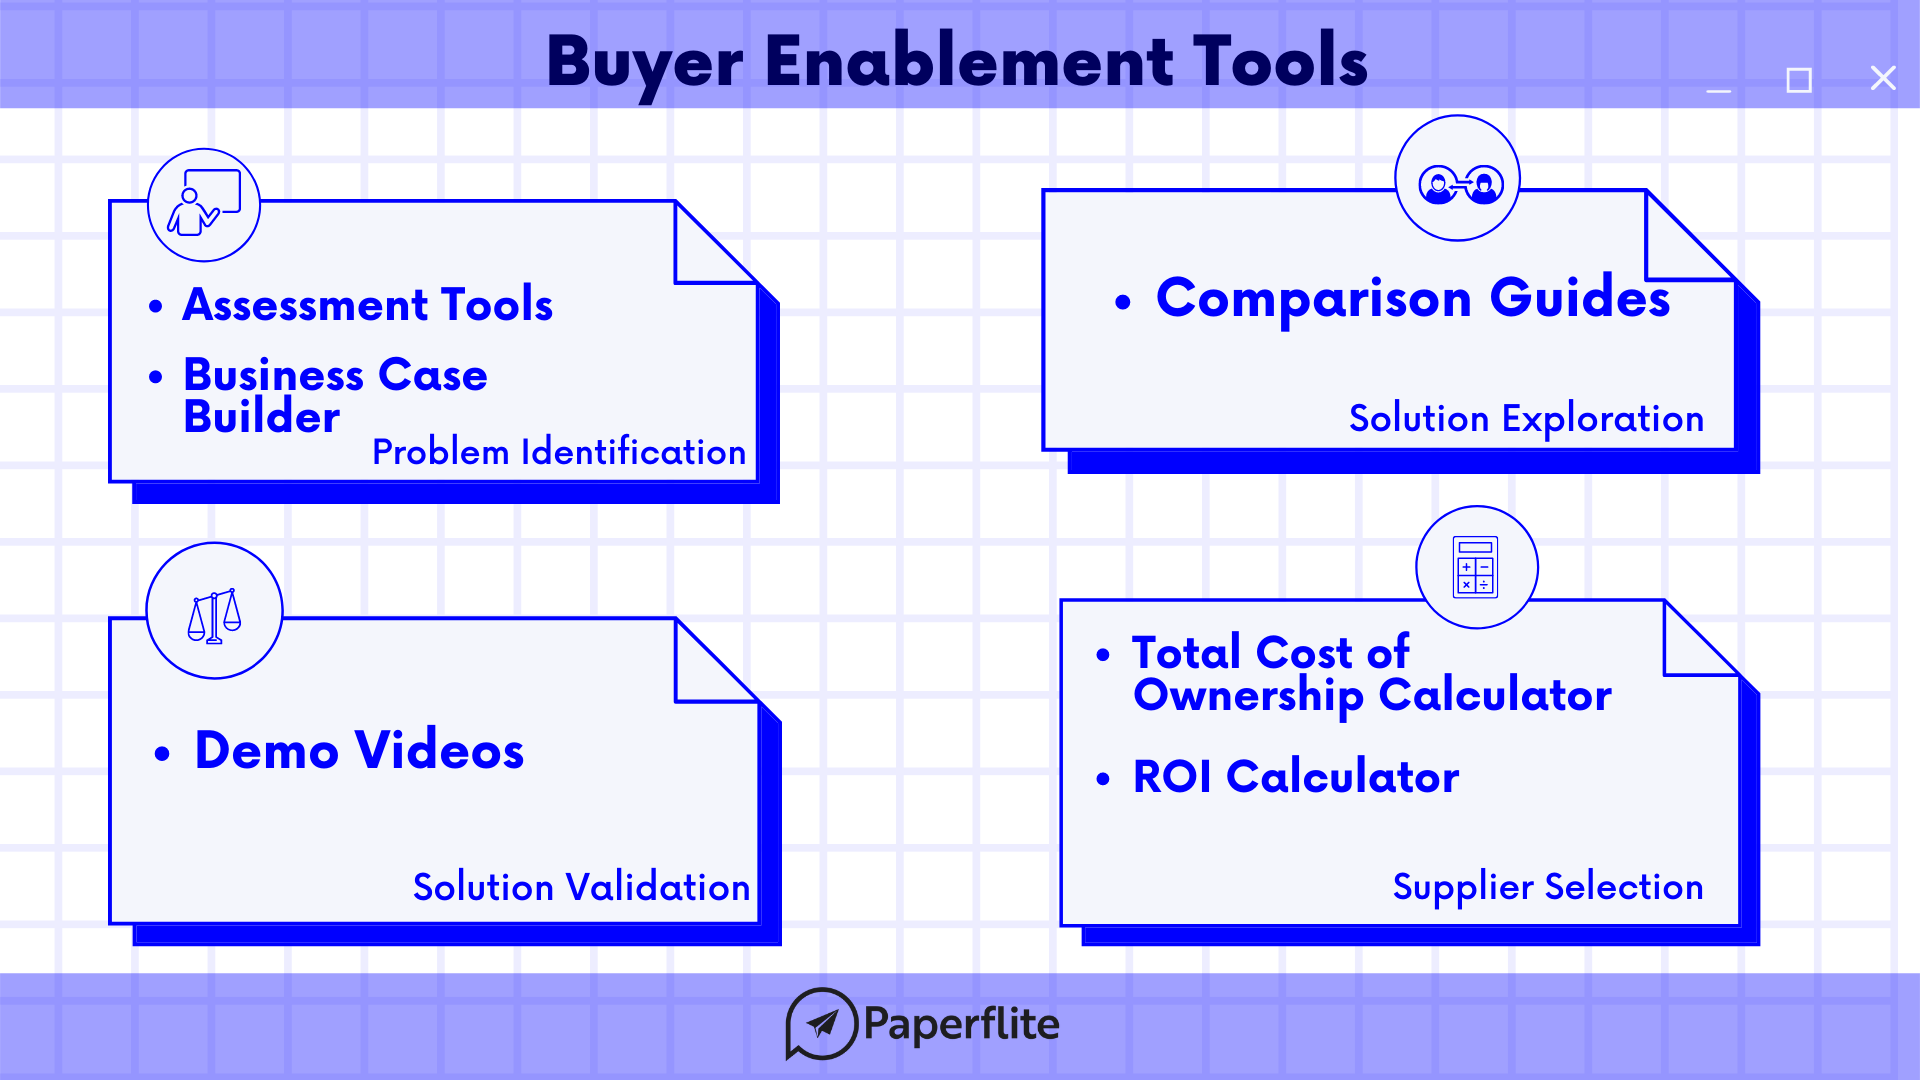 An image describing buyer enablement tools- by Paperflite